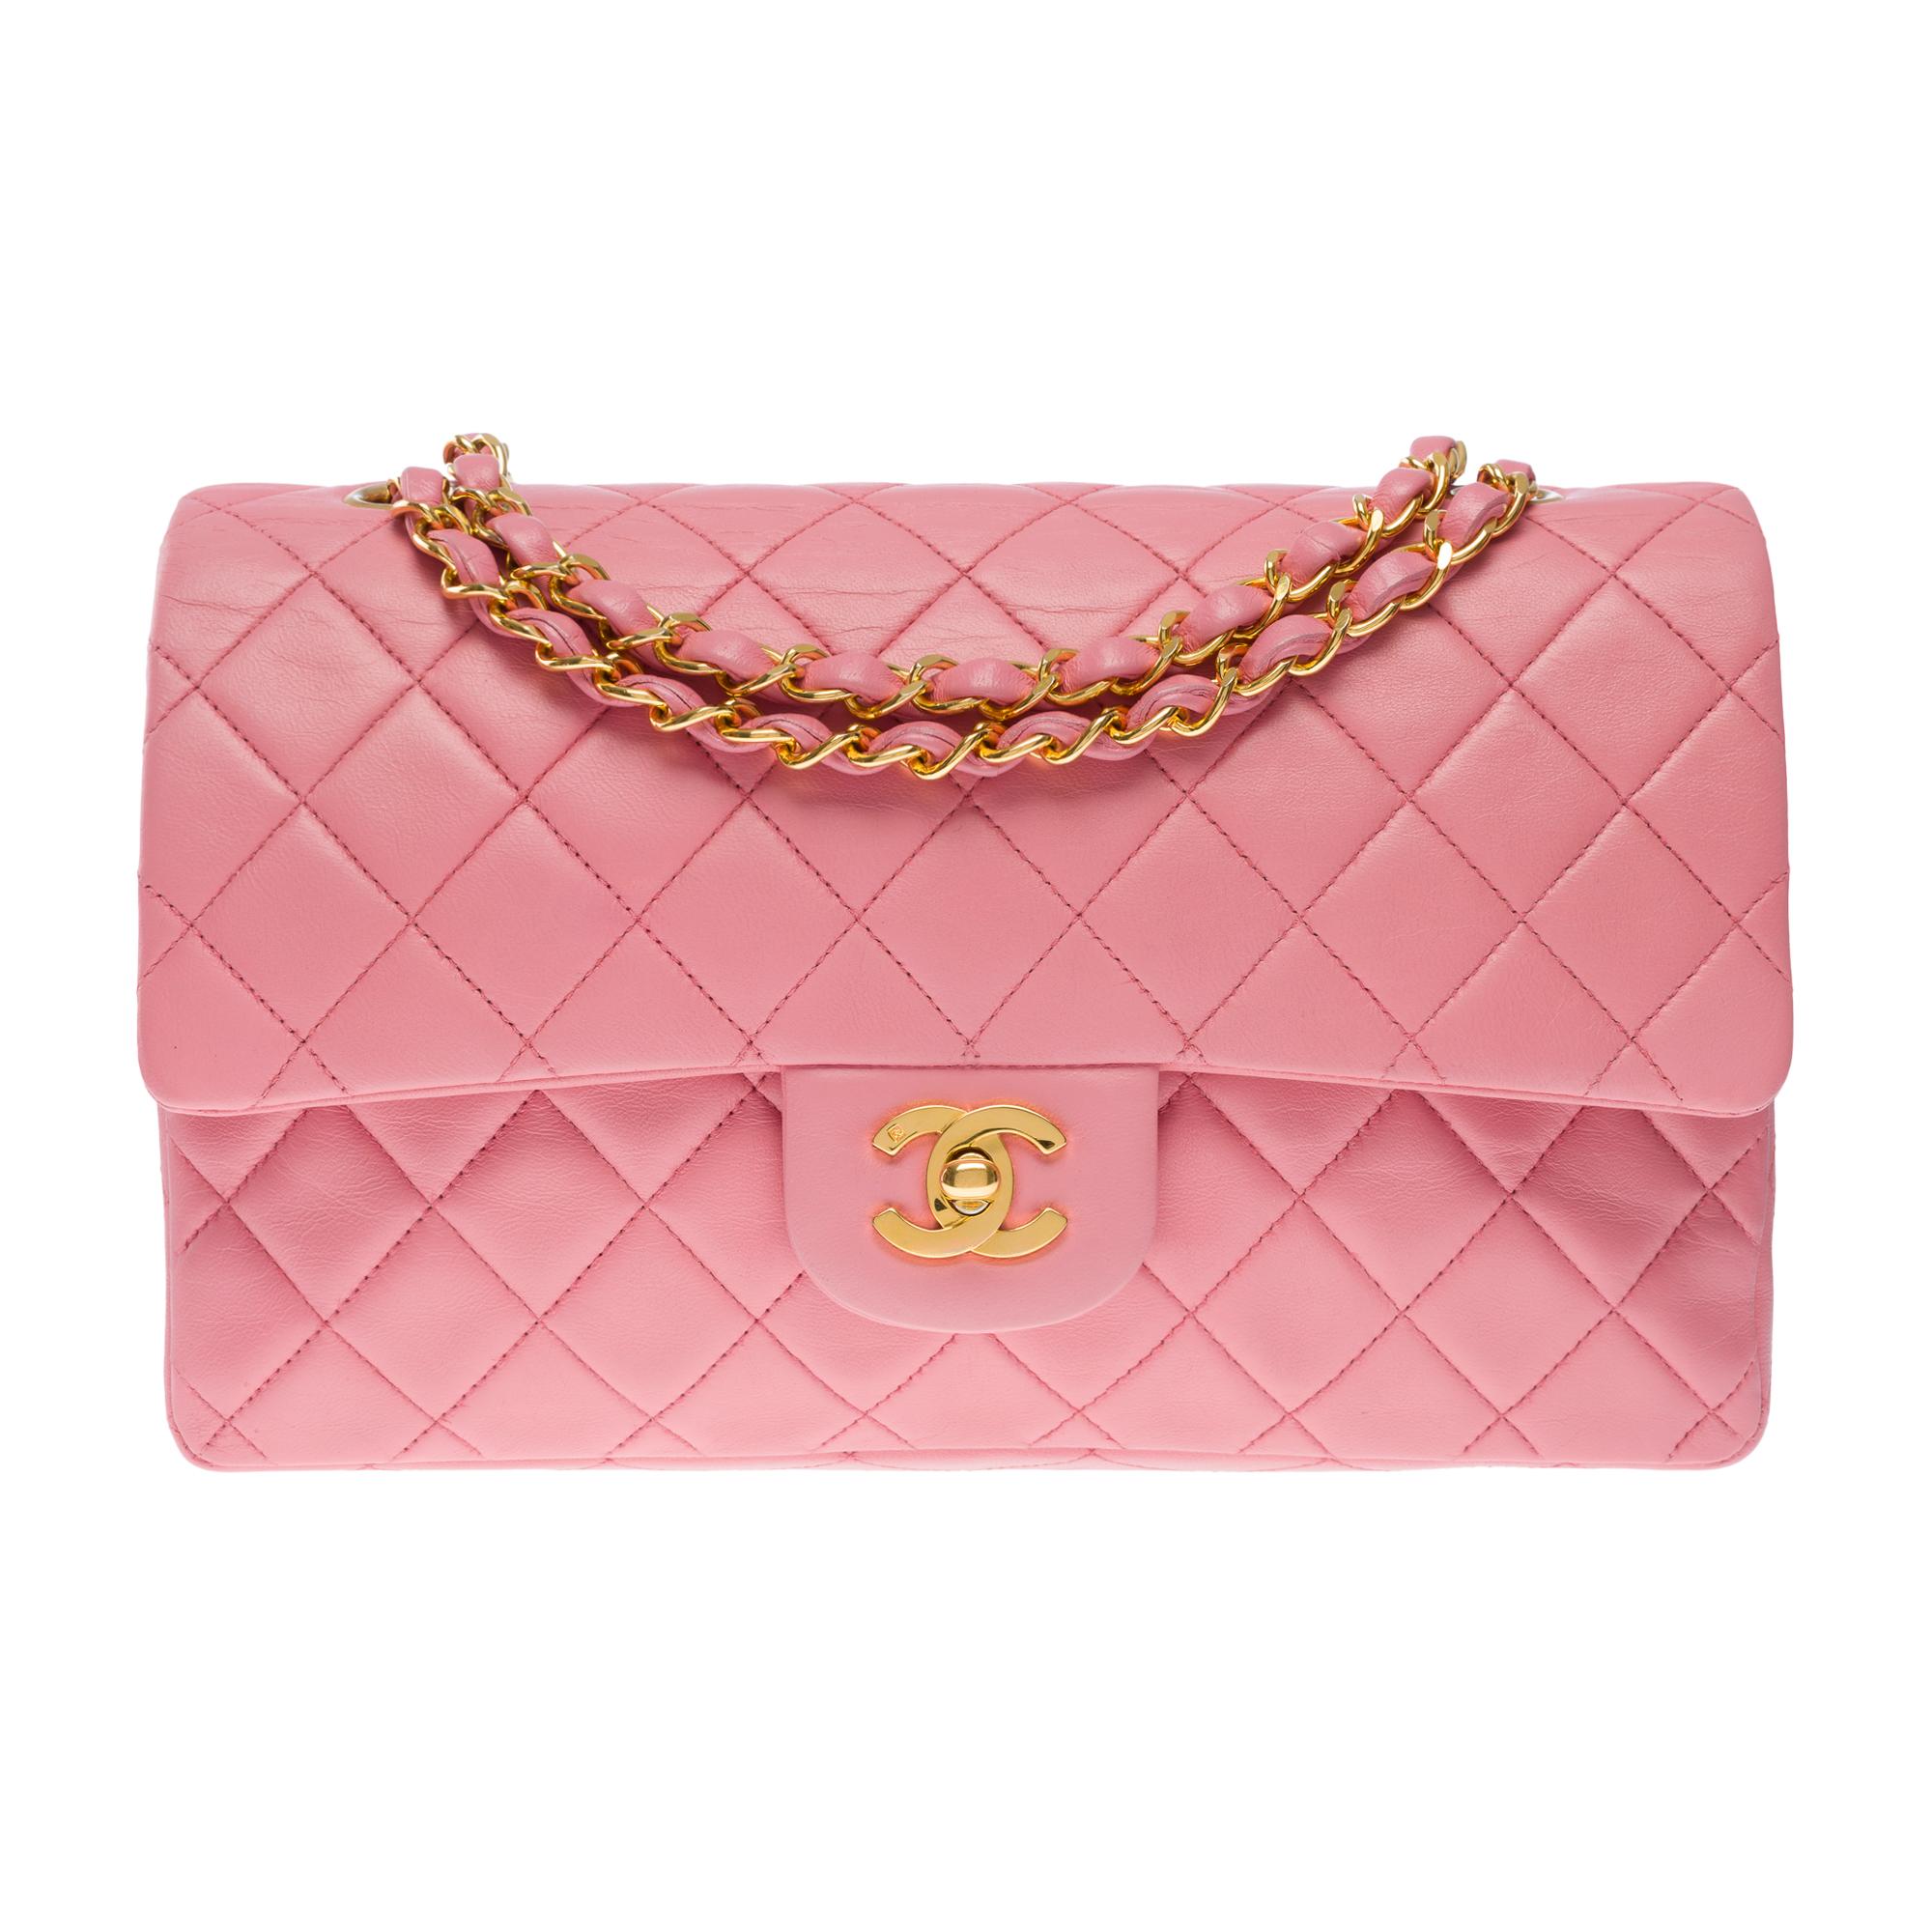 Women's Chanel Timeless Medium double Flap shoulder bag in Pink quilted lambskin, GHW